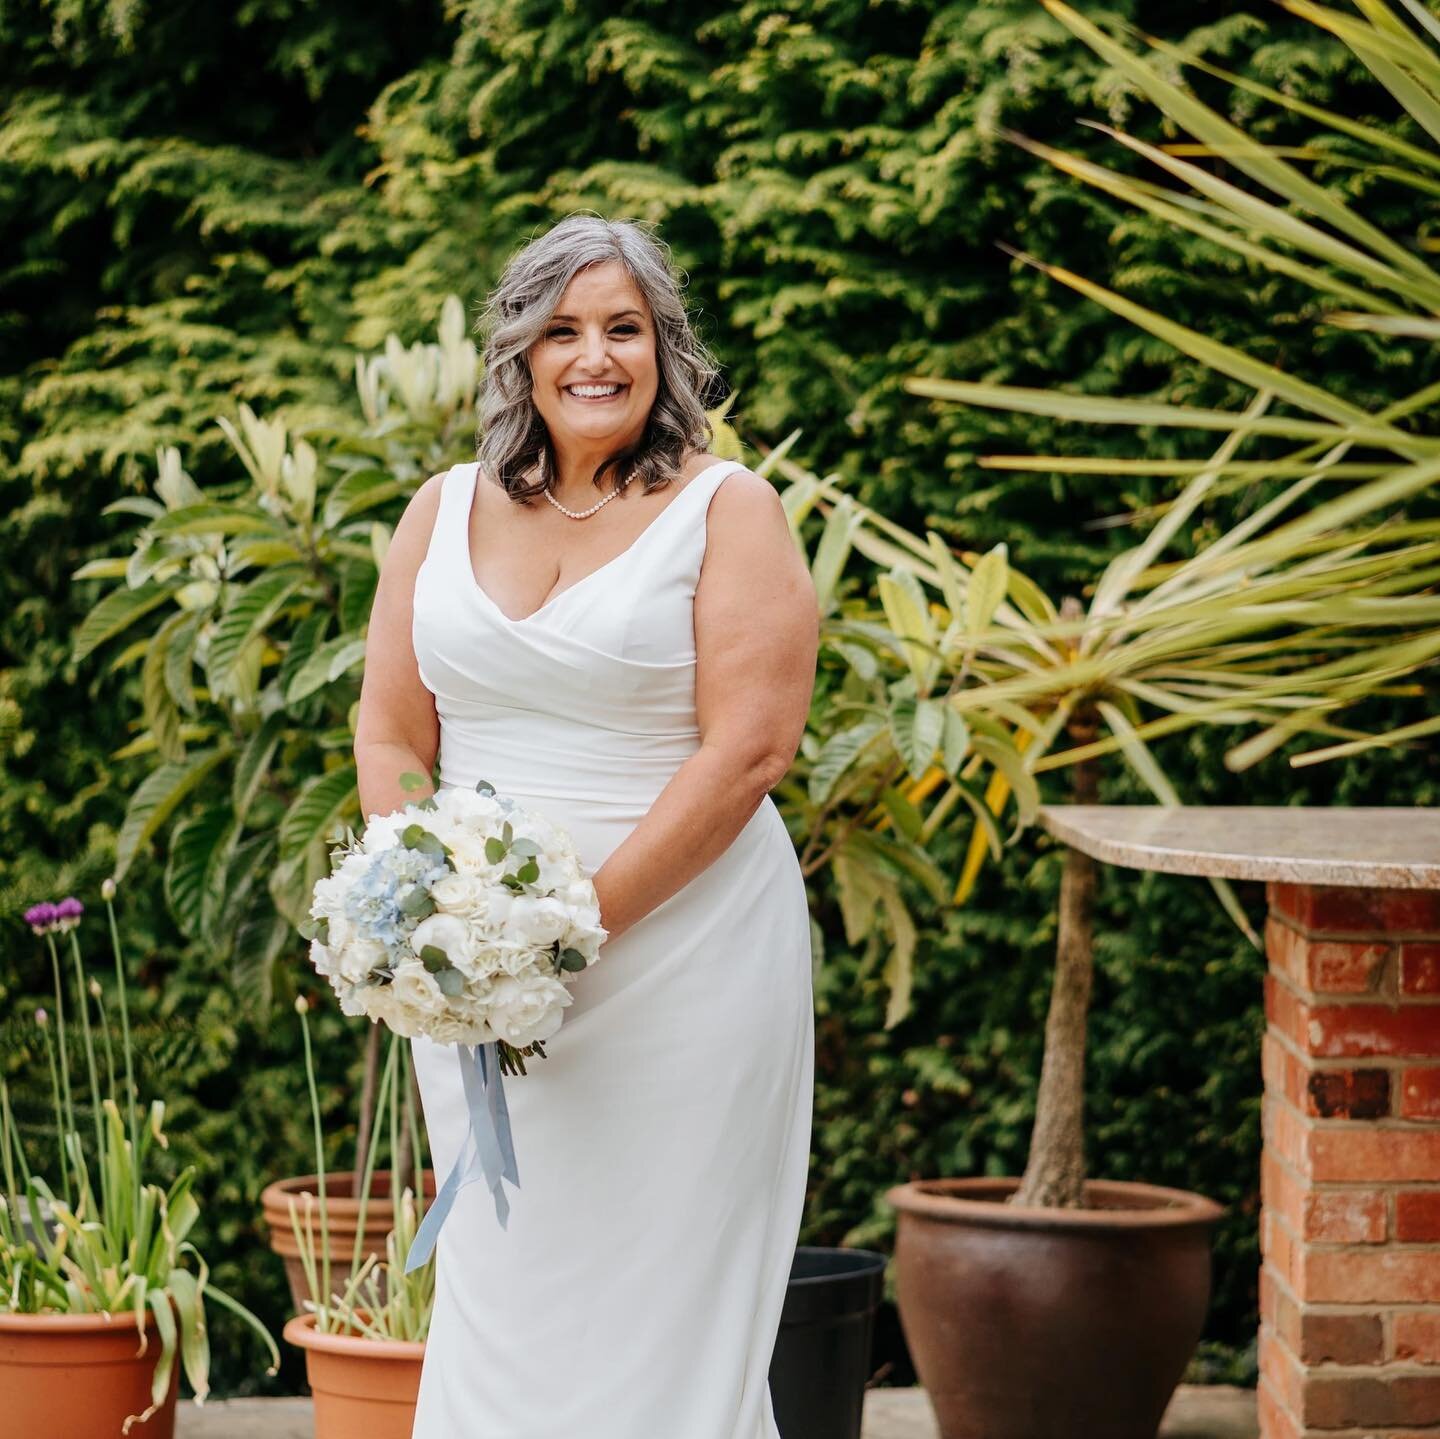 KAYDEE // Our beautiful bride on her wedding day looking absolutely stunning. We had the most wonderful morning with Kaydee and her gorgeous bridesmaids at High House. Thank you for having us to be part of your day. 
-
-
Hair Director: Tara 
Makeup D